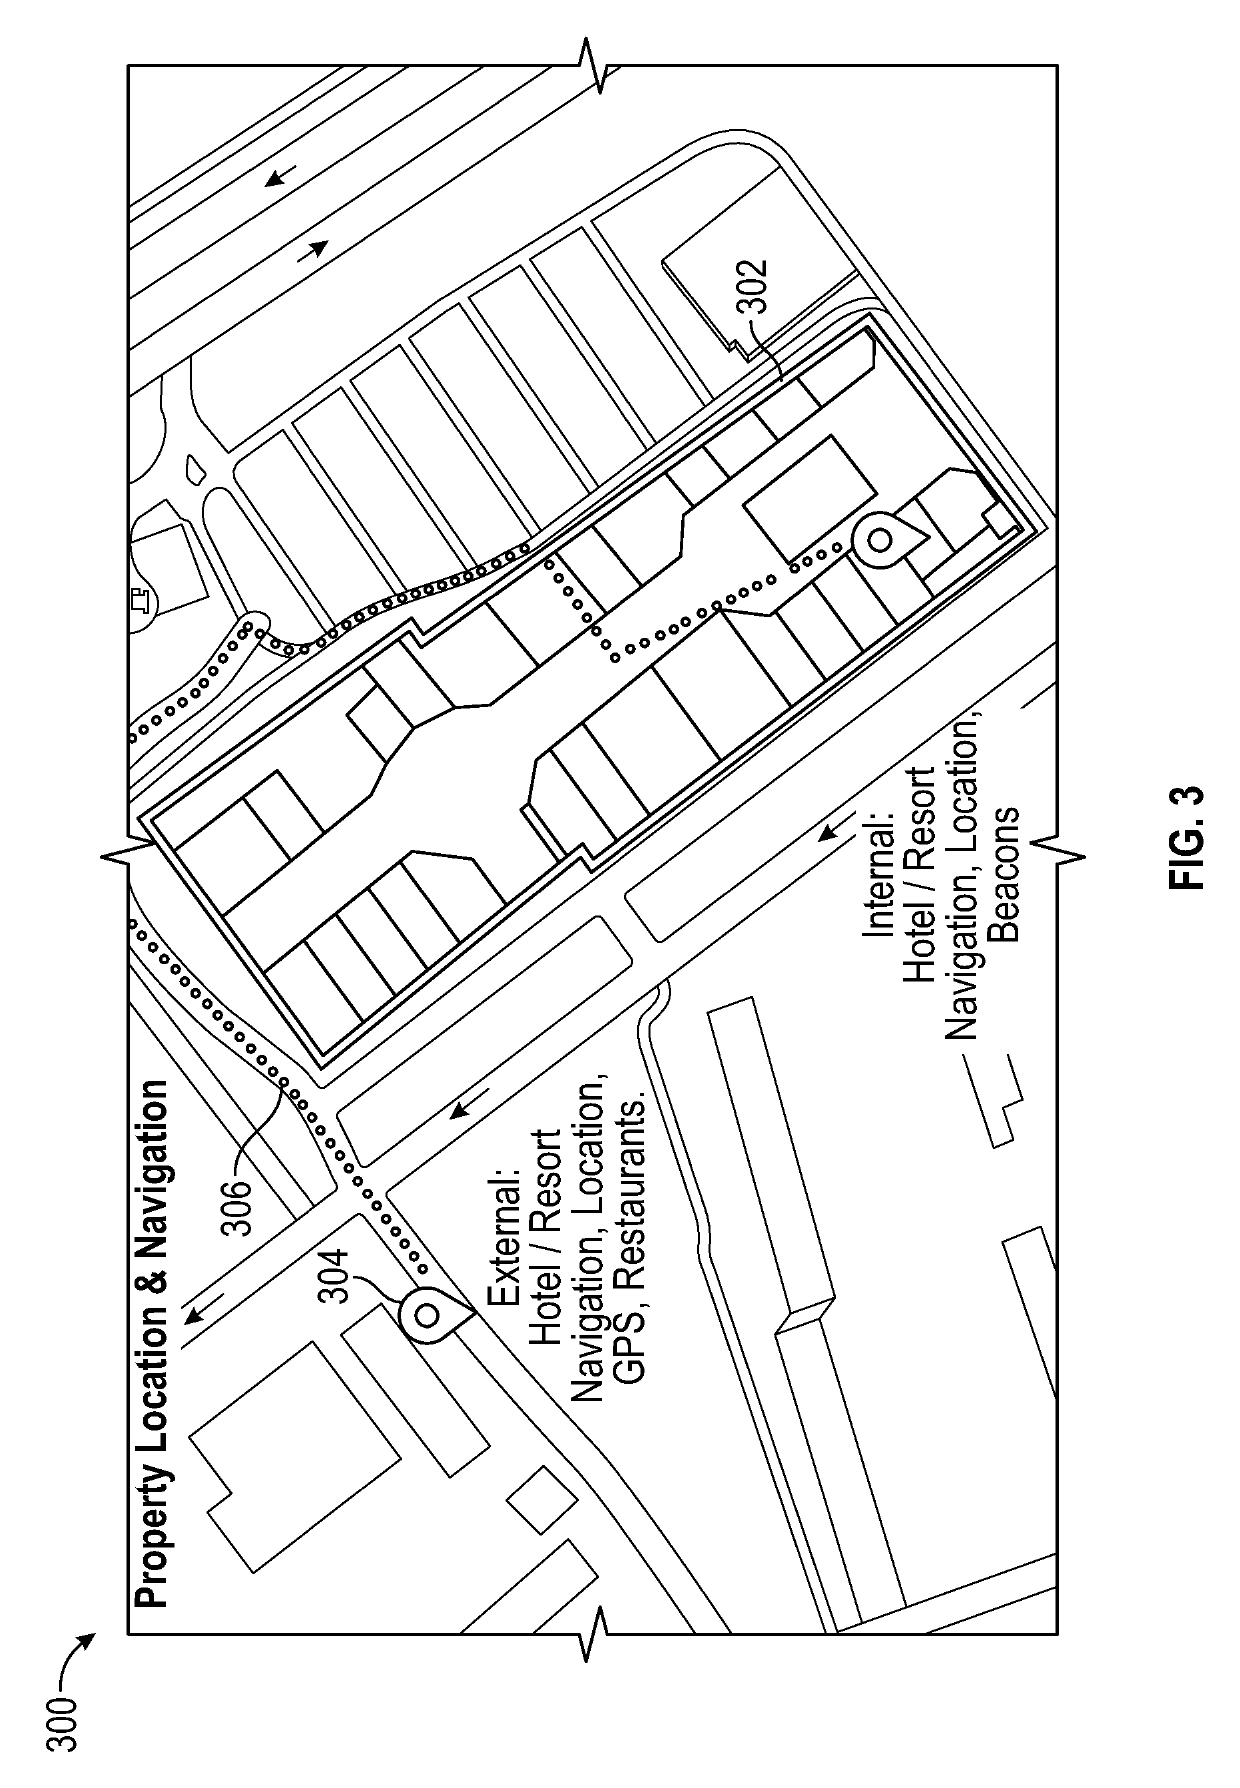 Systems and methods for customizing hotel, timeshare, and rental property guest experiences, and conserving resources and utilities using internet of things devices and location tracking augmented with contextual awareness